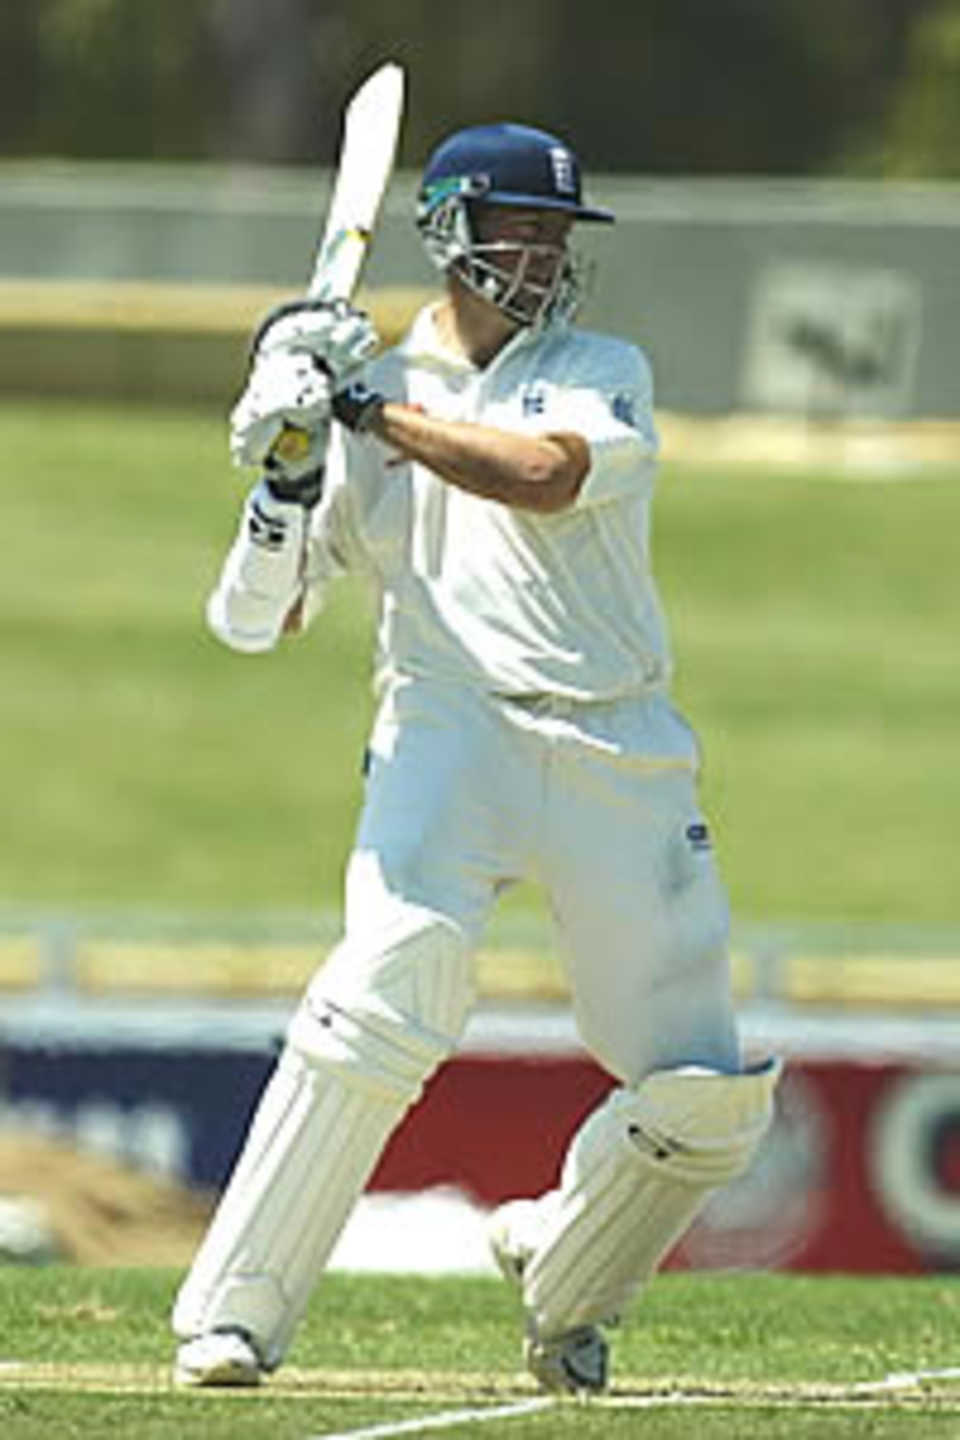 PERTH - OCTOBER 24: Marcus Trescothick of England in action during the first day of the two day Tour Match between England and Western Australia being played at the WACA, Perth, Australia on October 24, 2002.